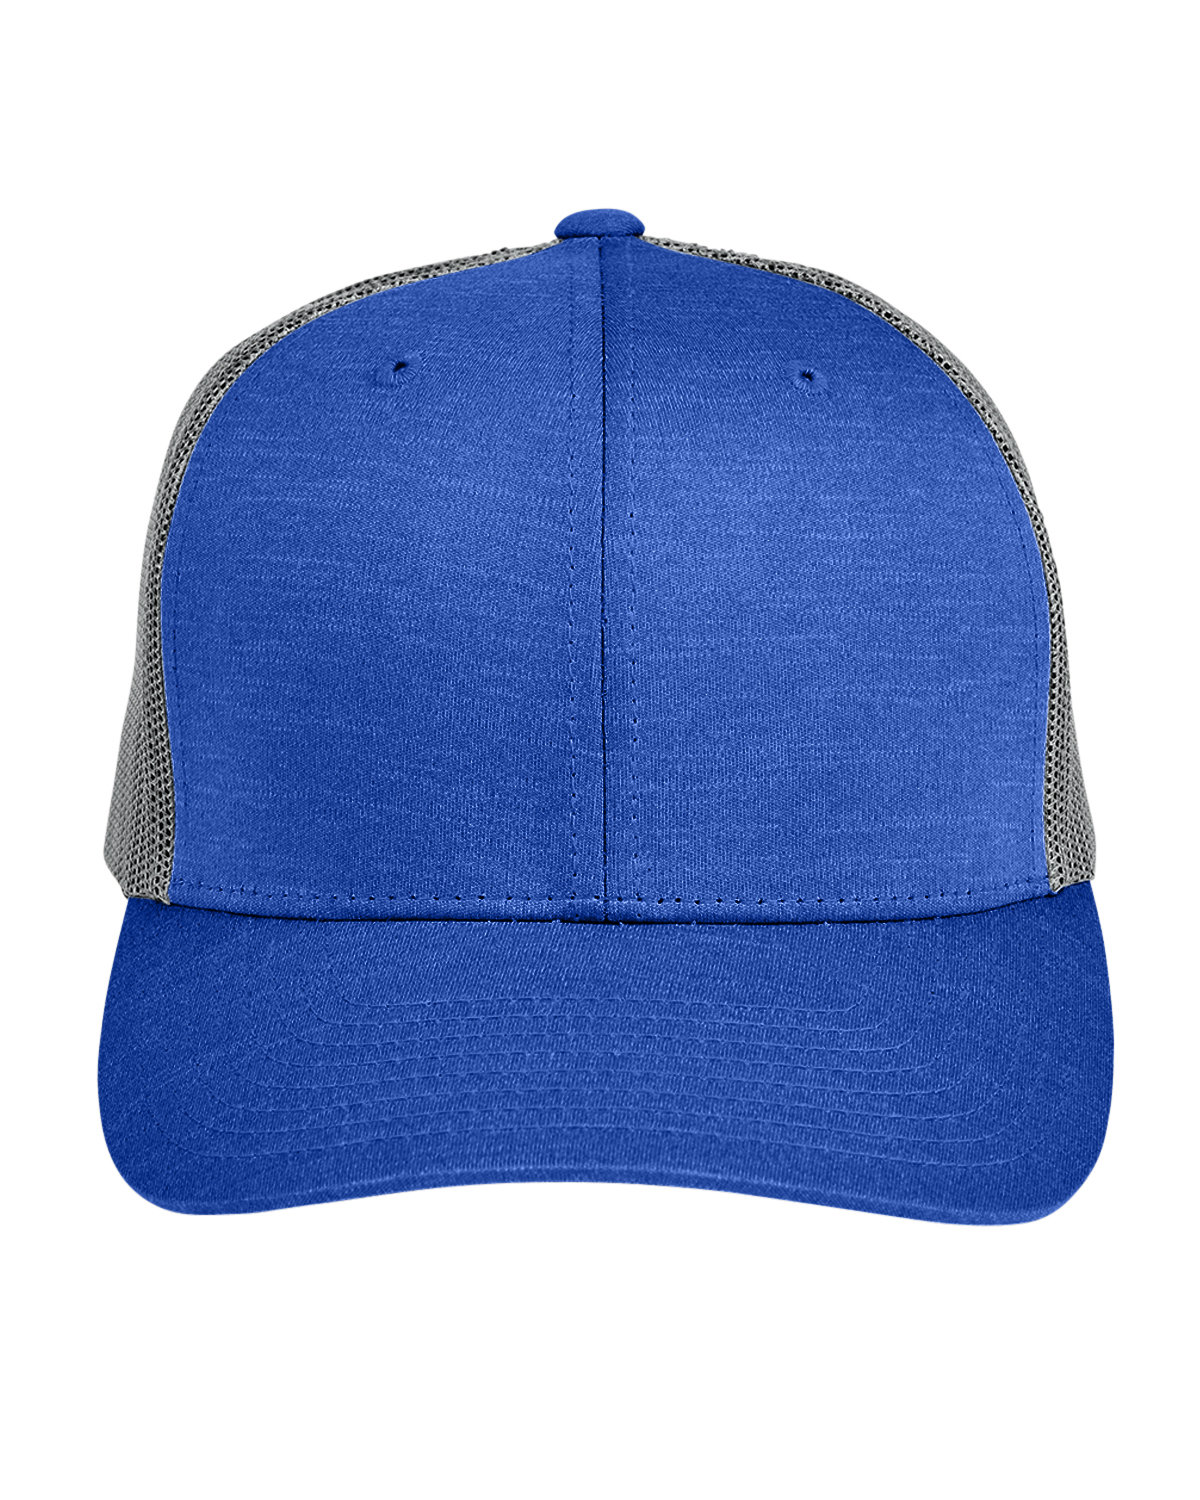 Yupoong® by Team 365 Zone Cap Trucker | Adult alphabroder Sonic Heather